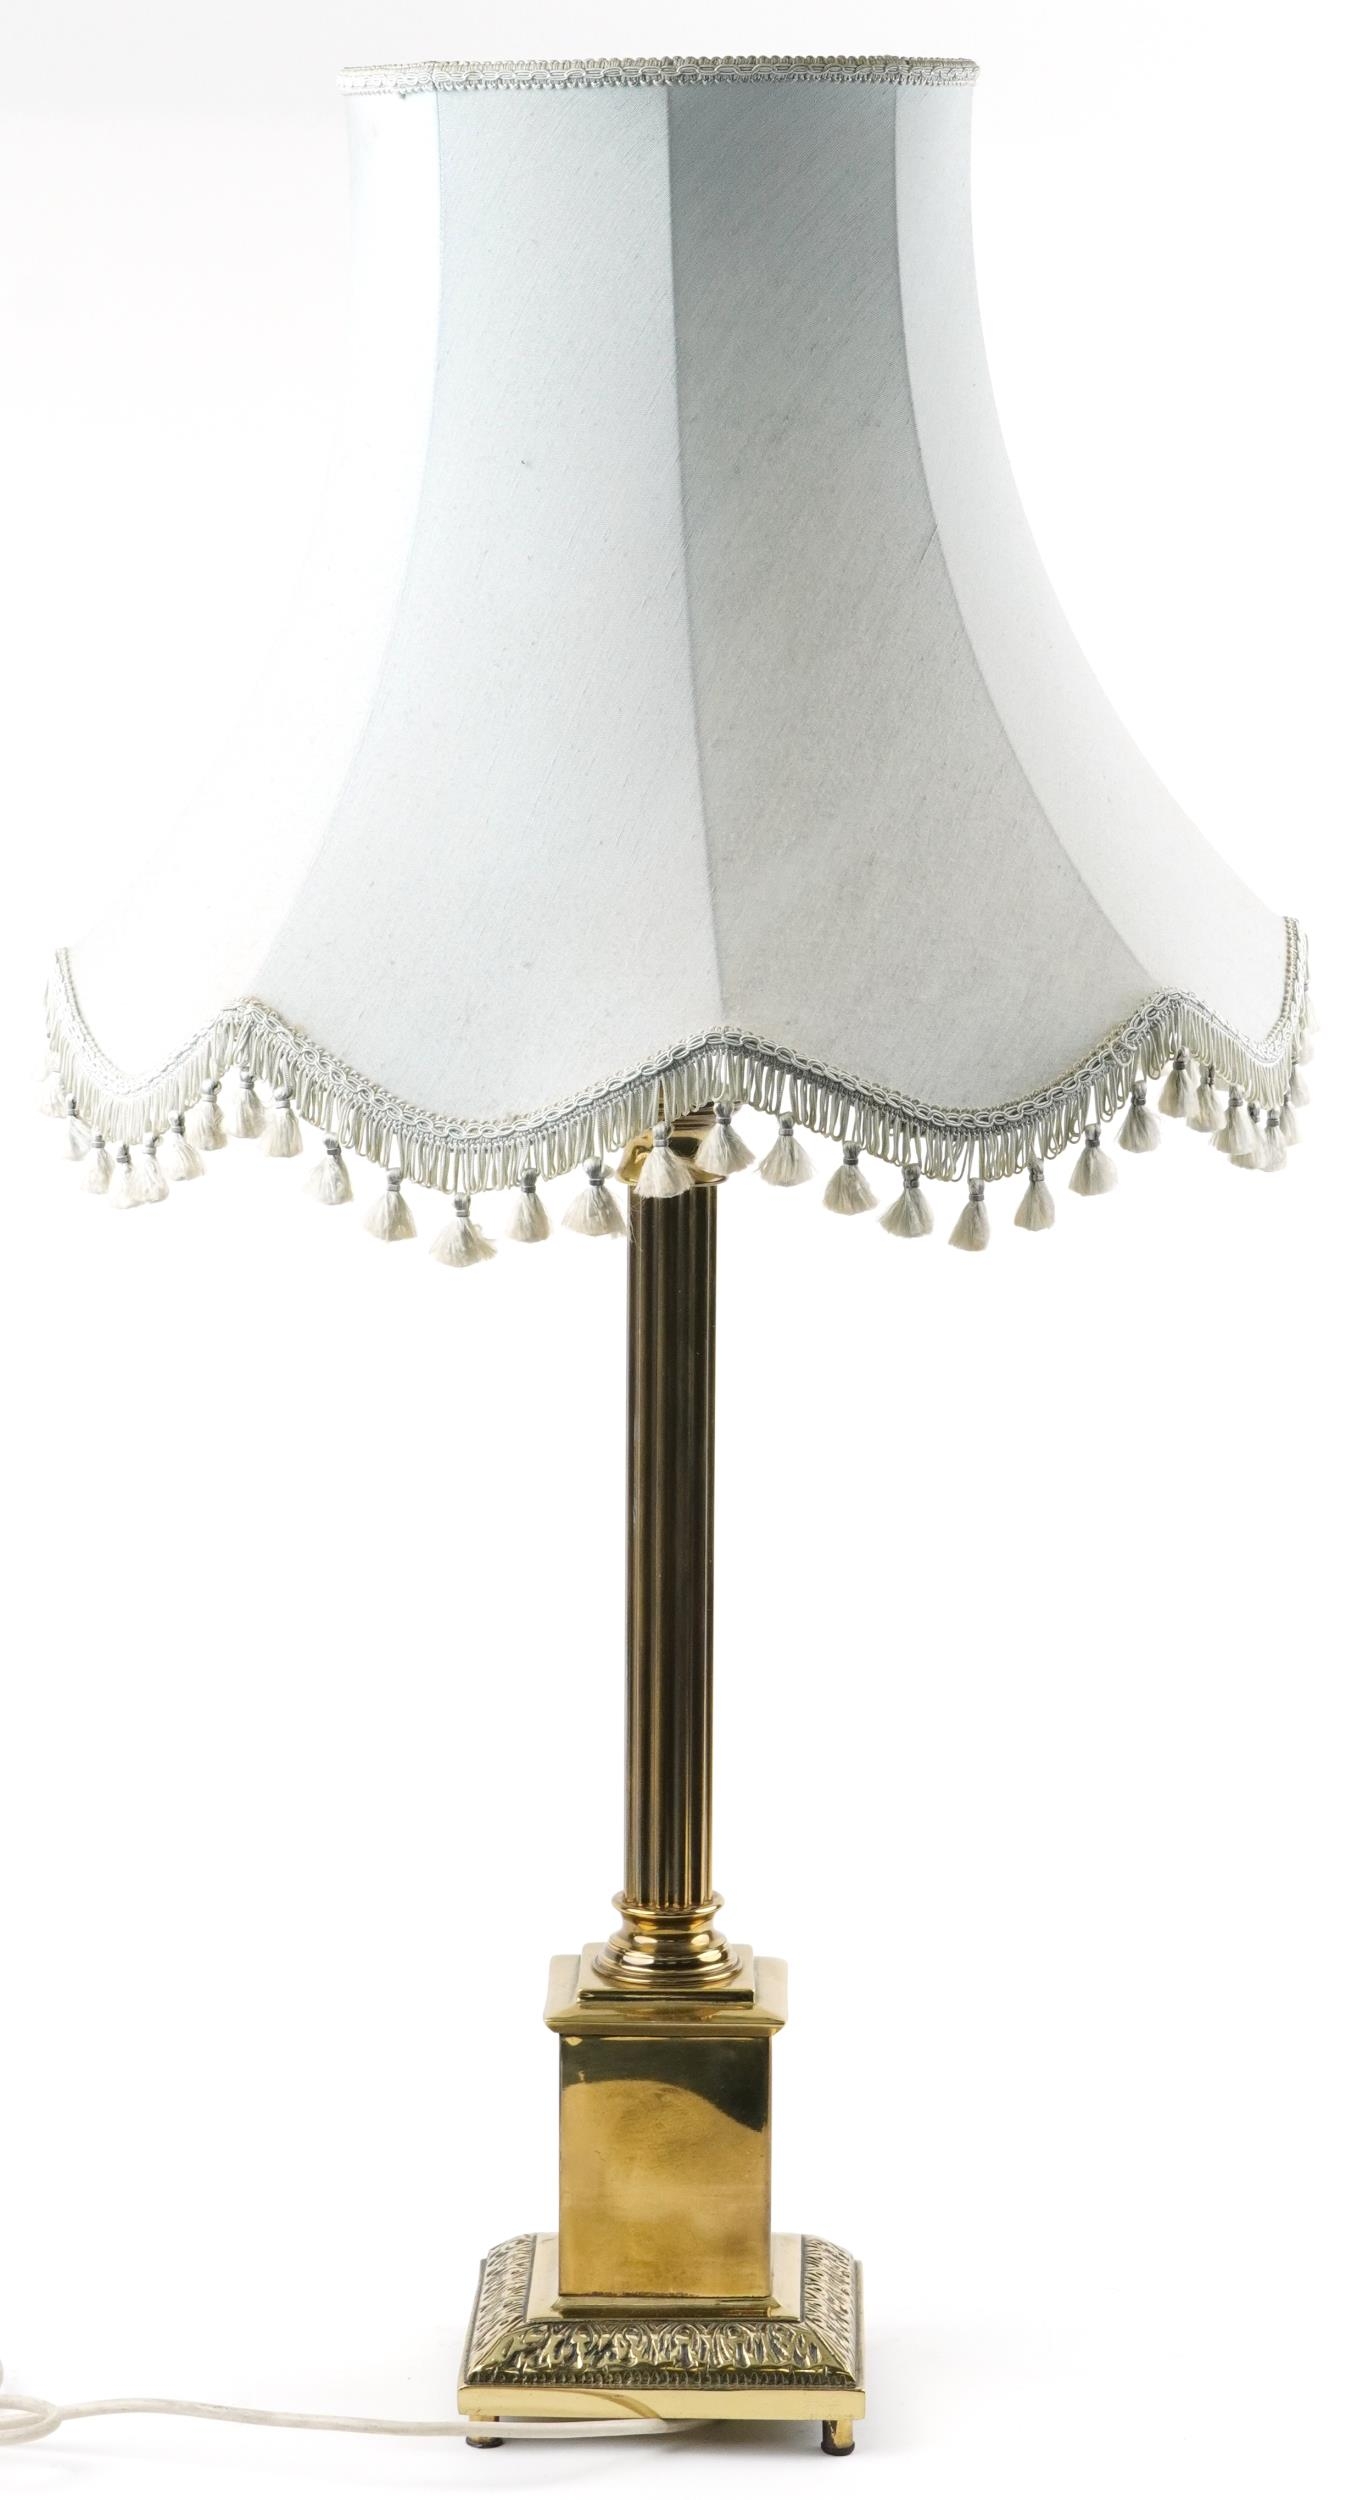 Large 19th century style brass Corinthian column table lamp with shade, overall 98cm high - Image 2 of 3